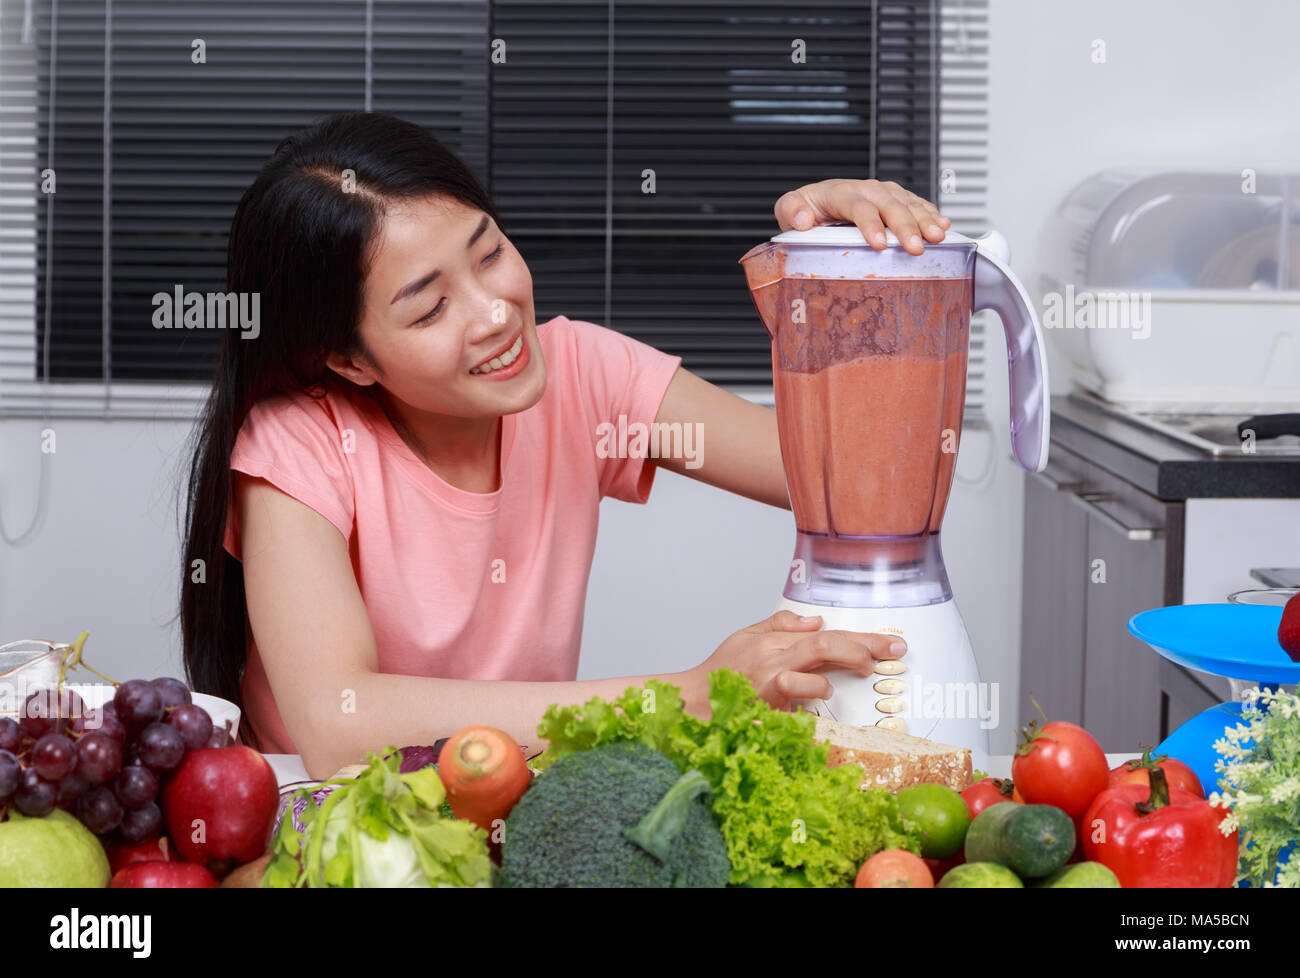 young woman making smoothies with blender in kitchen Stock Photo